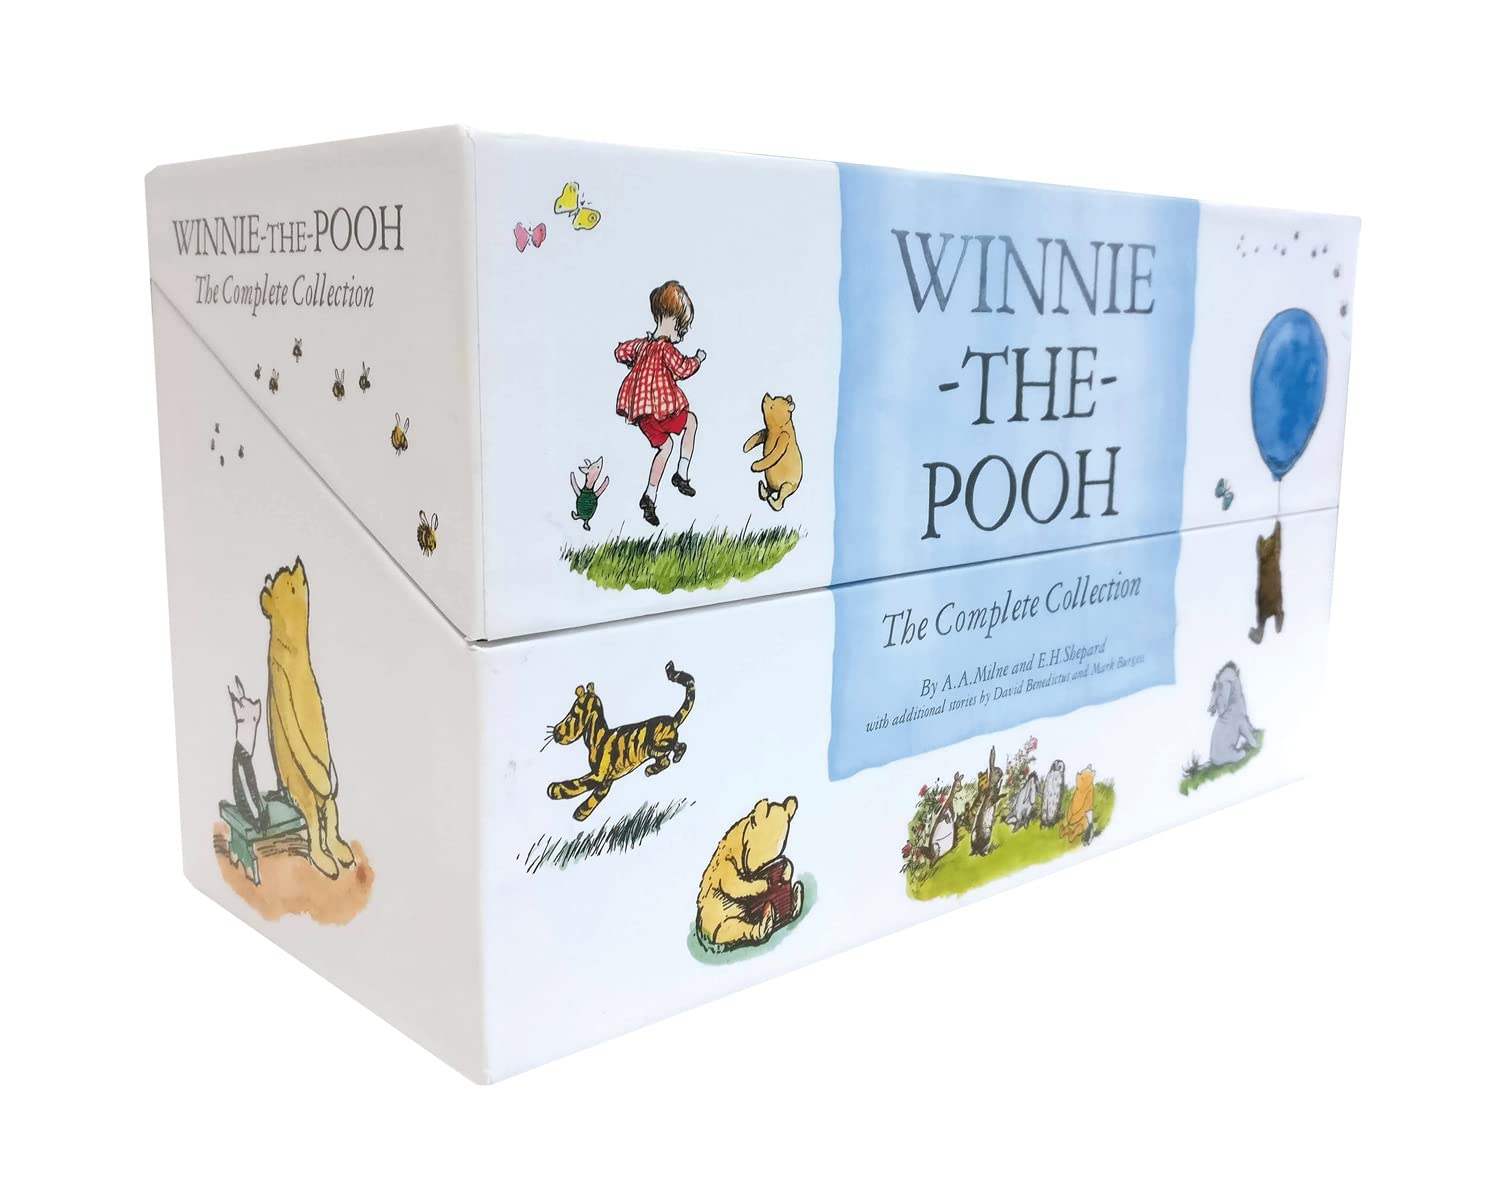 Winnie the Pooh - 30 Copy Complete Collection